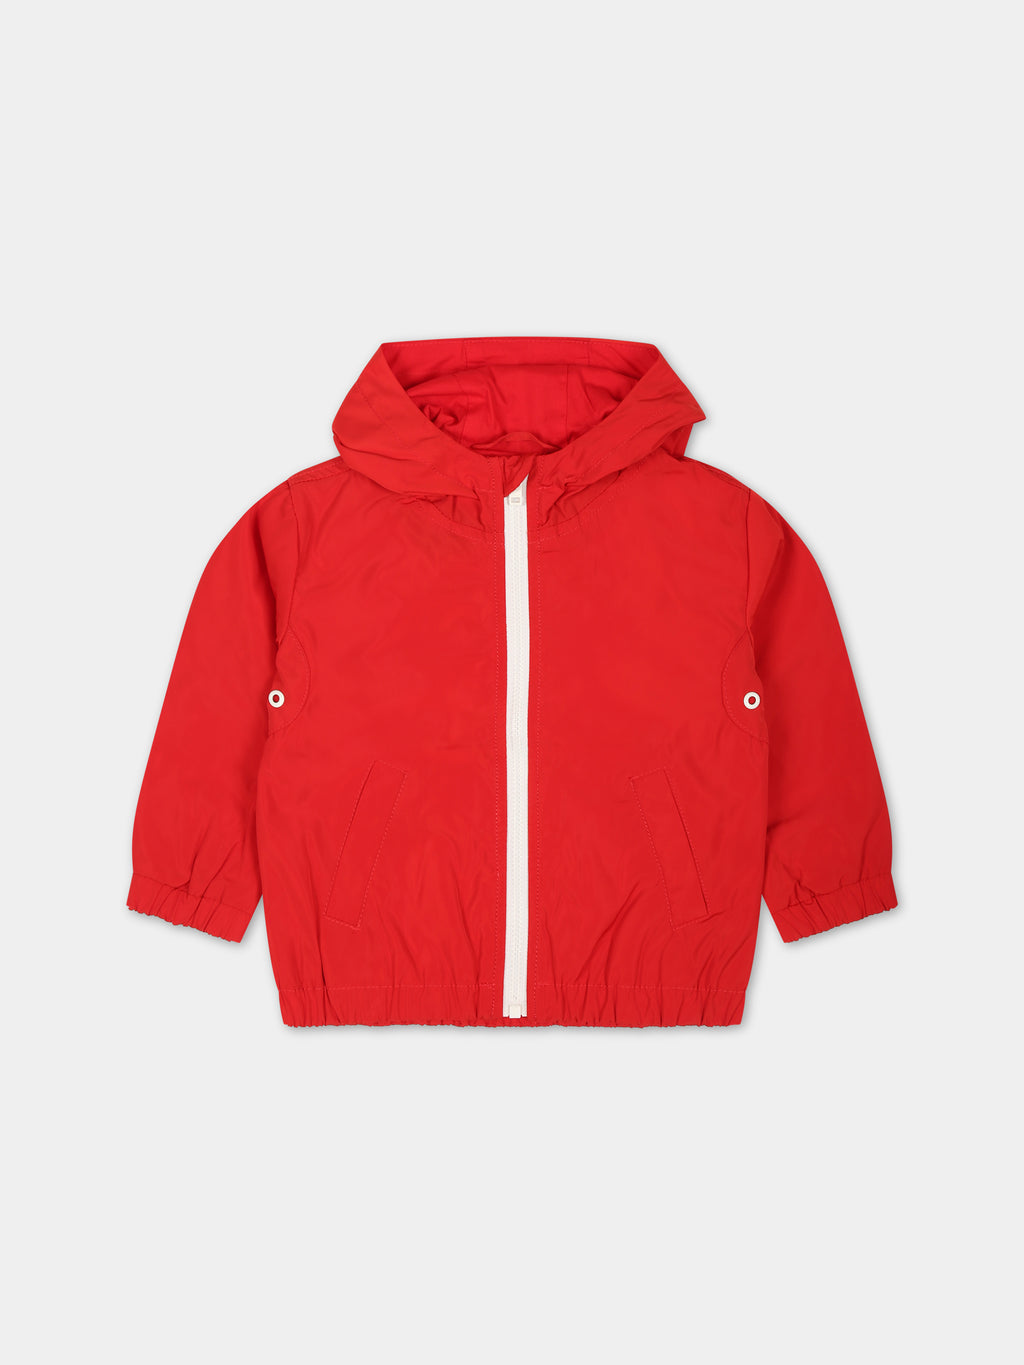 Red wind jacket for baby kids